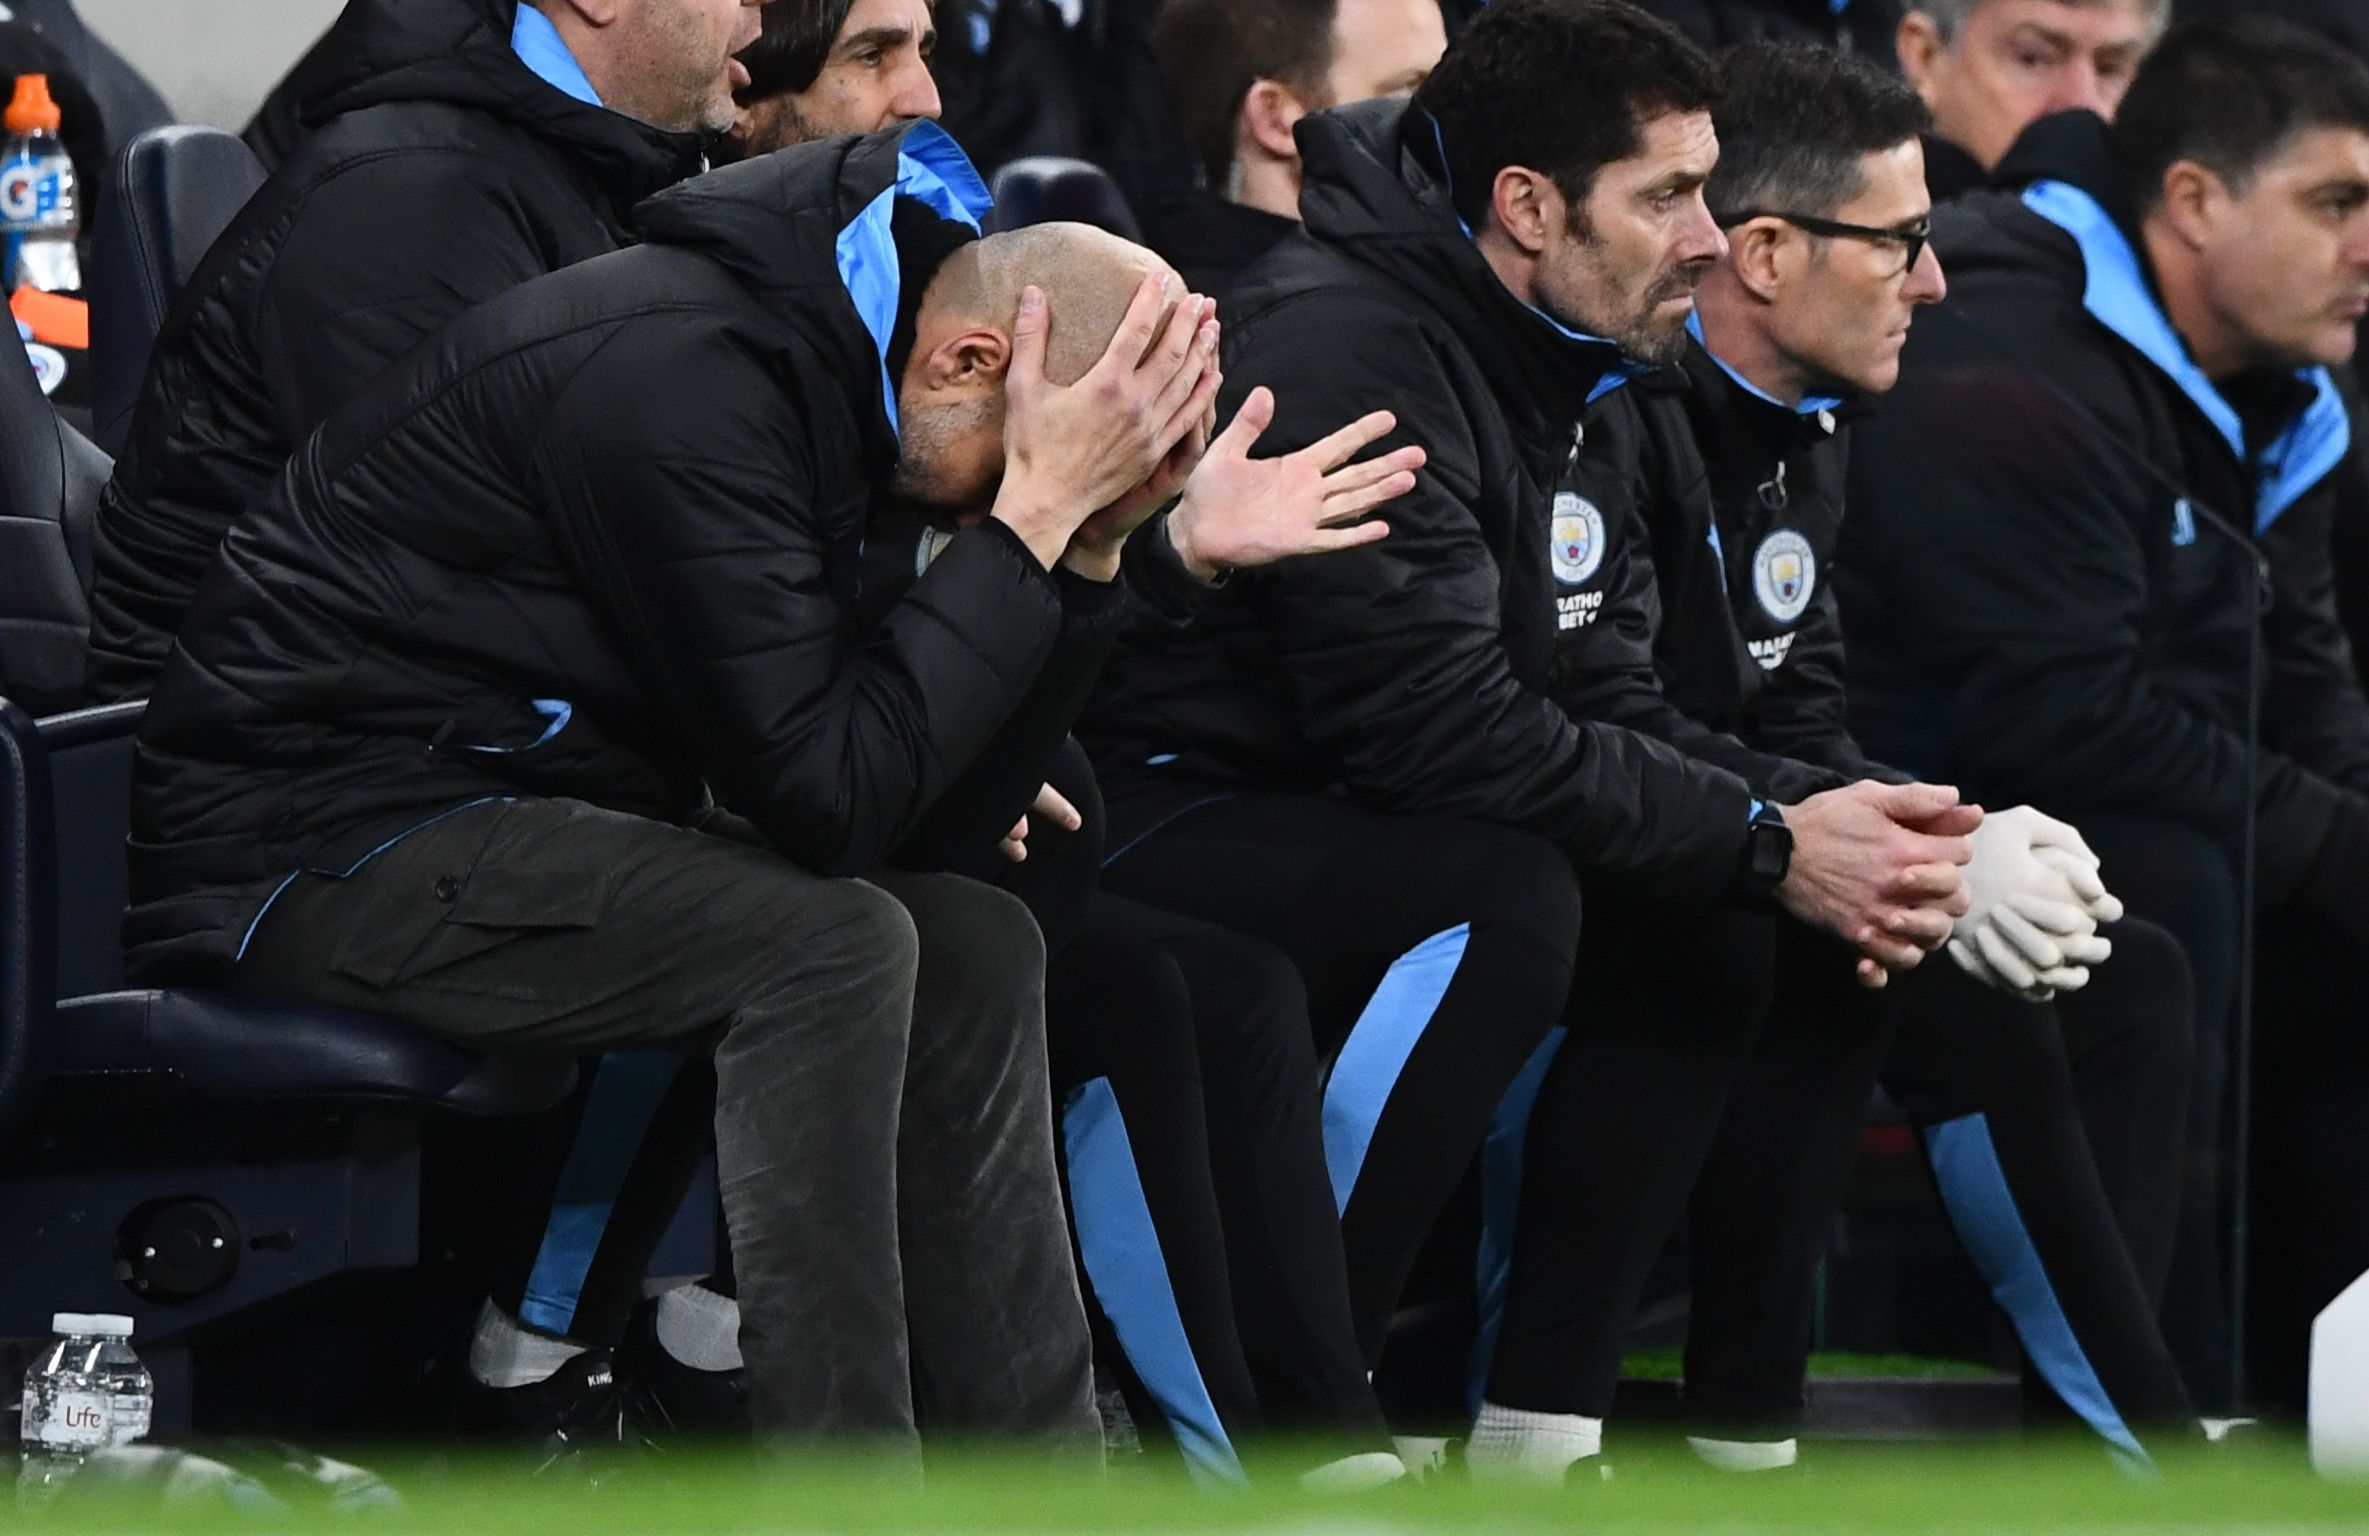 Manchester City’s transfer ban has given Pep Guardiola even more to think about